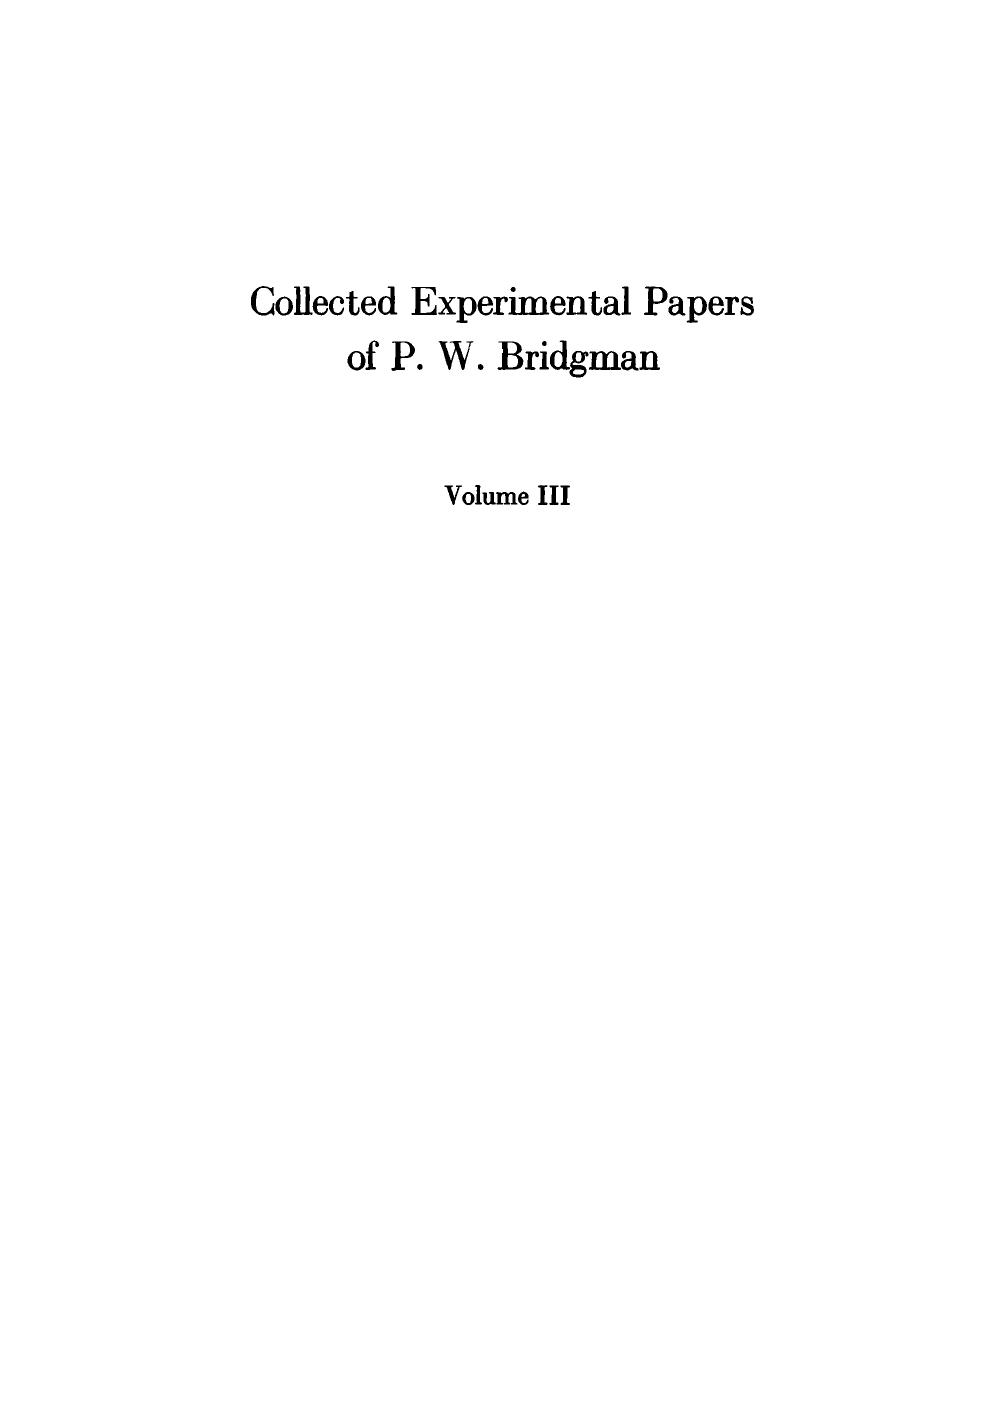 Collected Experimental Papers of P. W. Bridgman, Volume III: Papers 32-58 by Percy Williams Bridgman